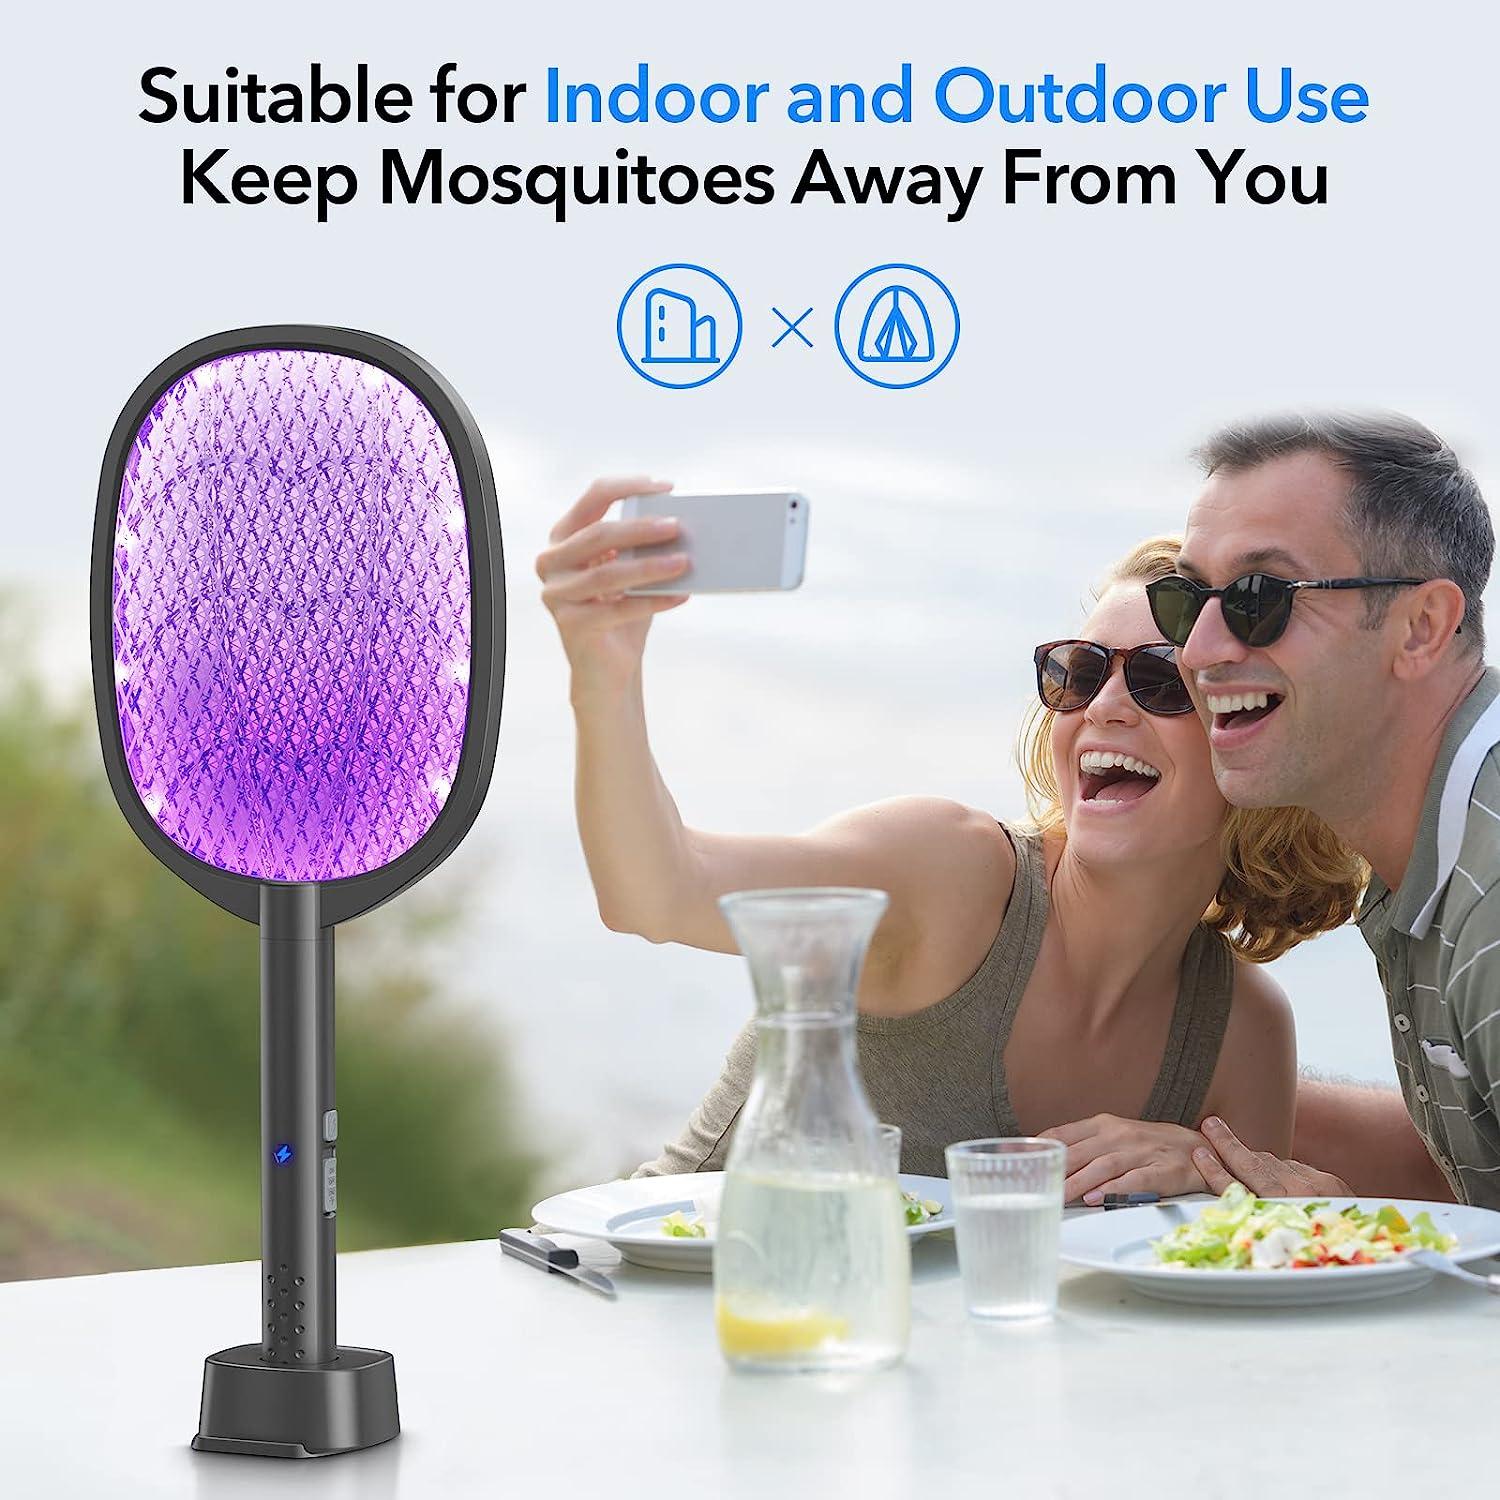 Fly and Mosquito Zapper: USB Mosquito Killer Lamp - Free Shipping USA